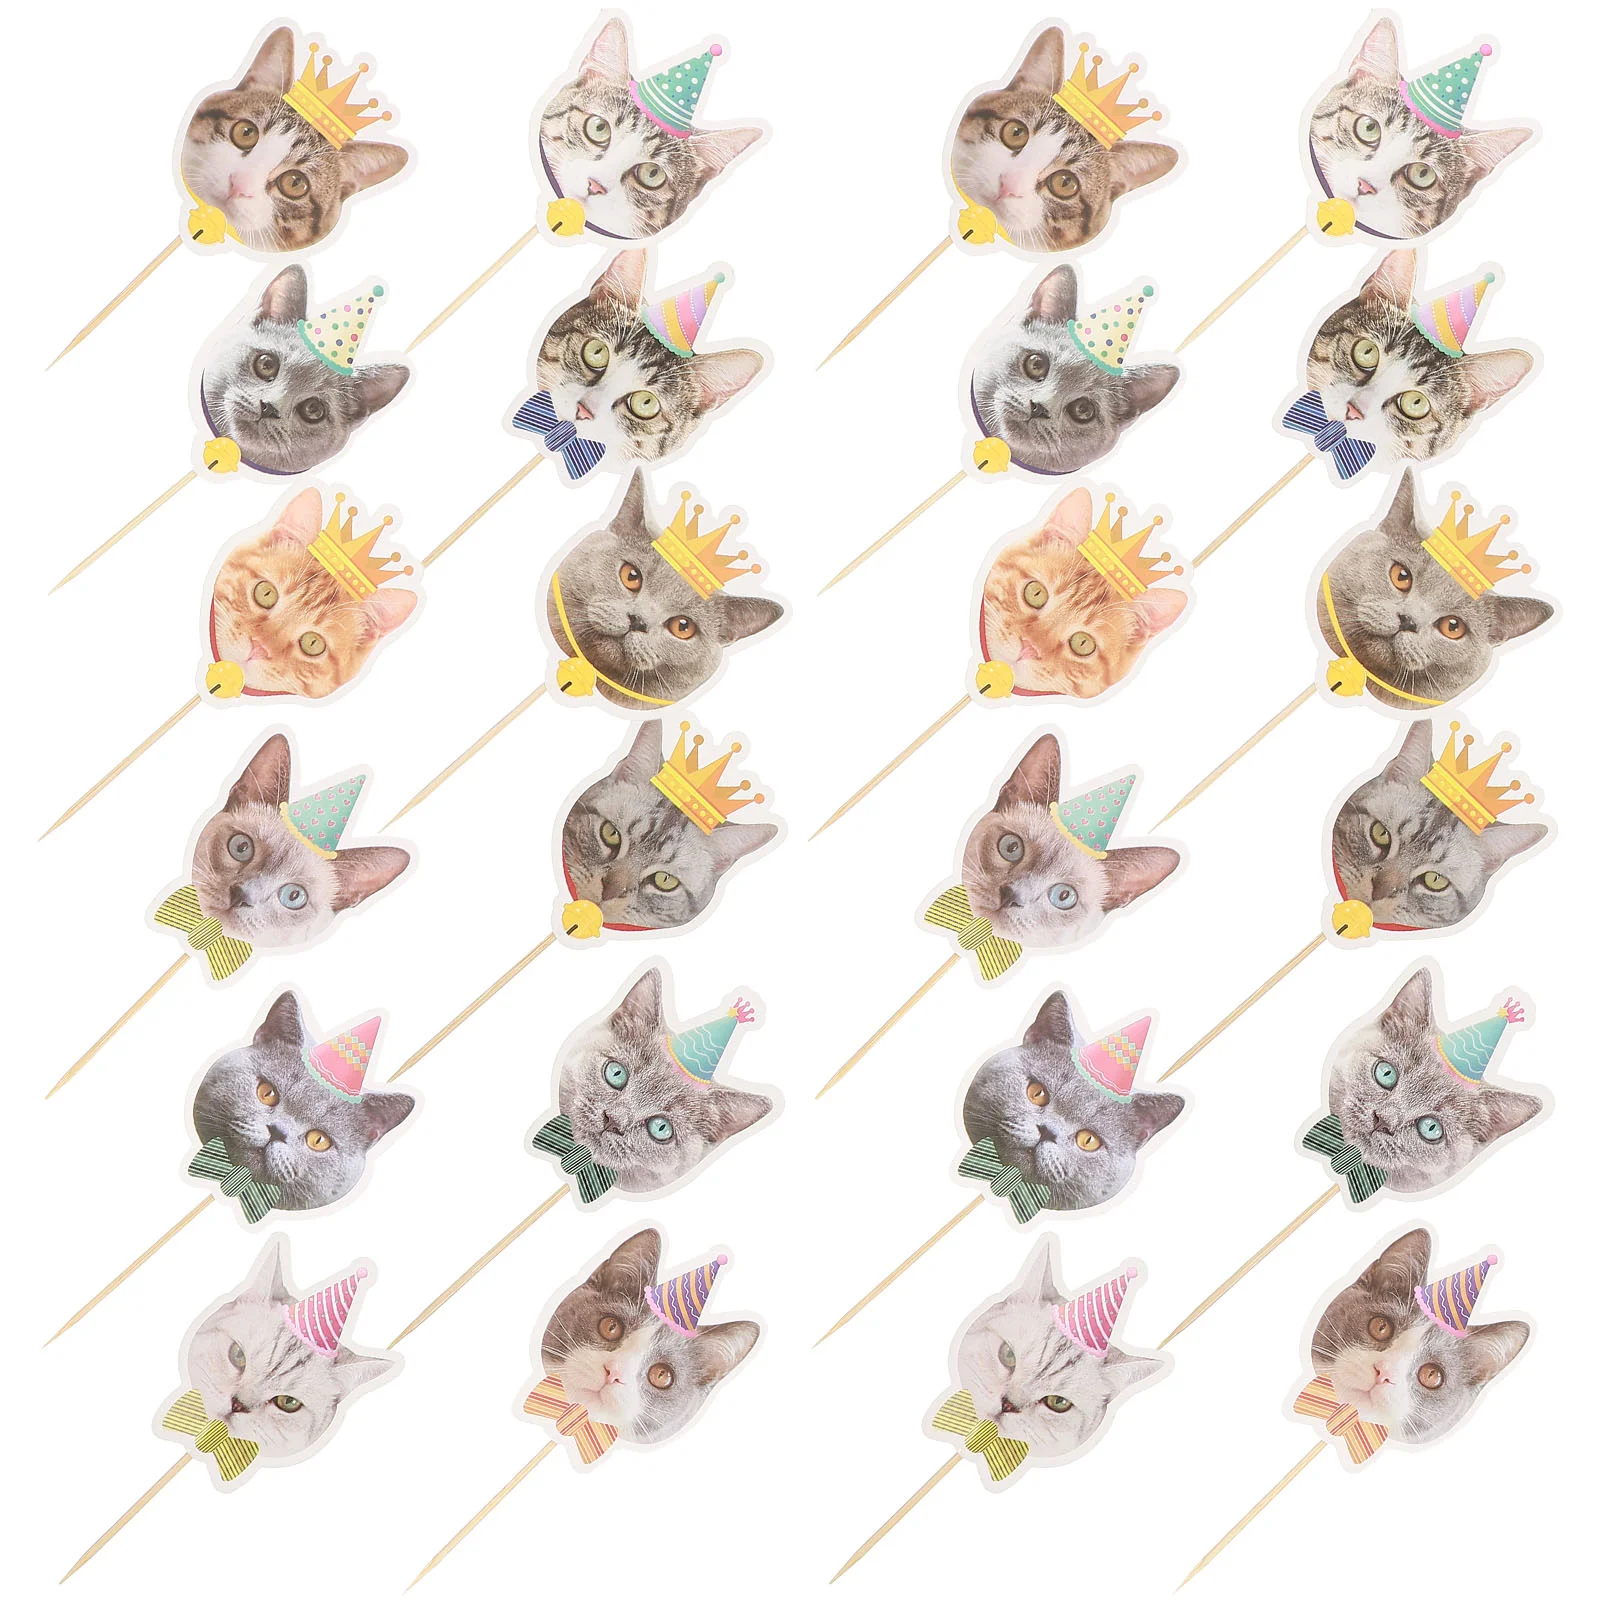 

24pcs Cat Cupcake Toppers Cats Kitten Theme Toothpicks For Birthday Shower Party Supplies